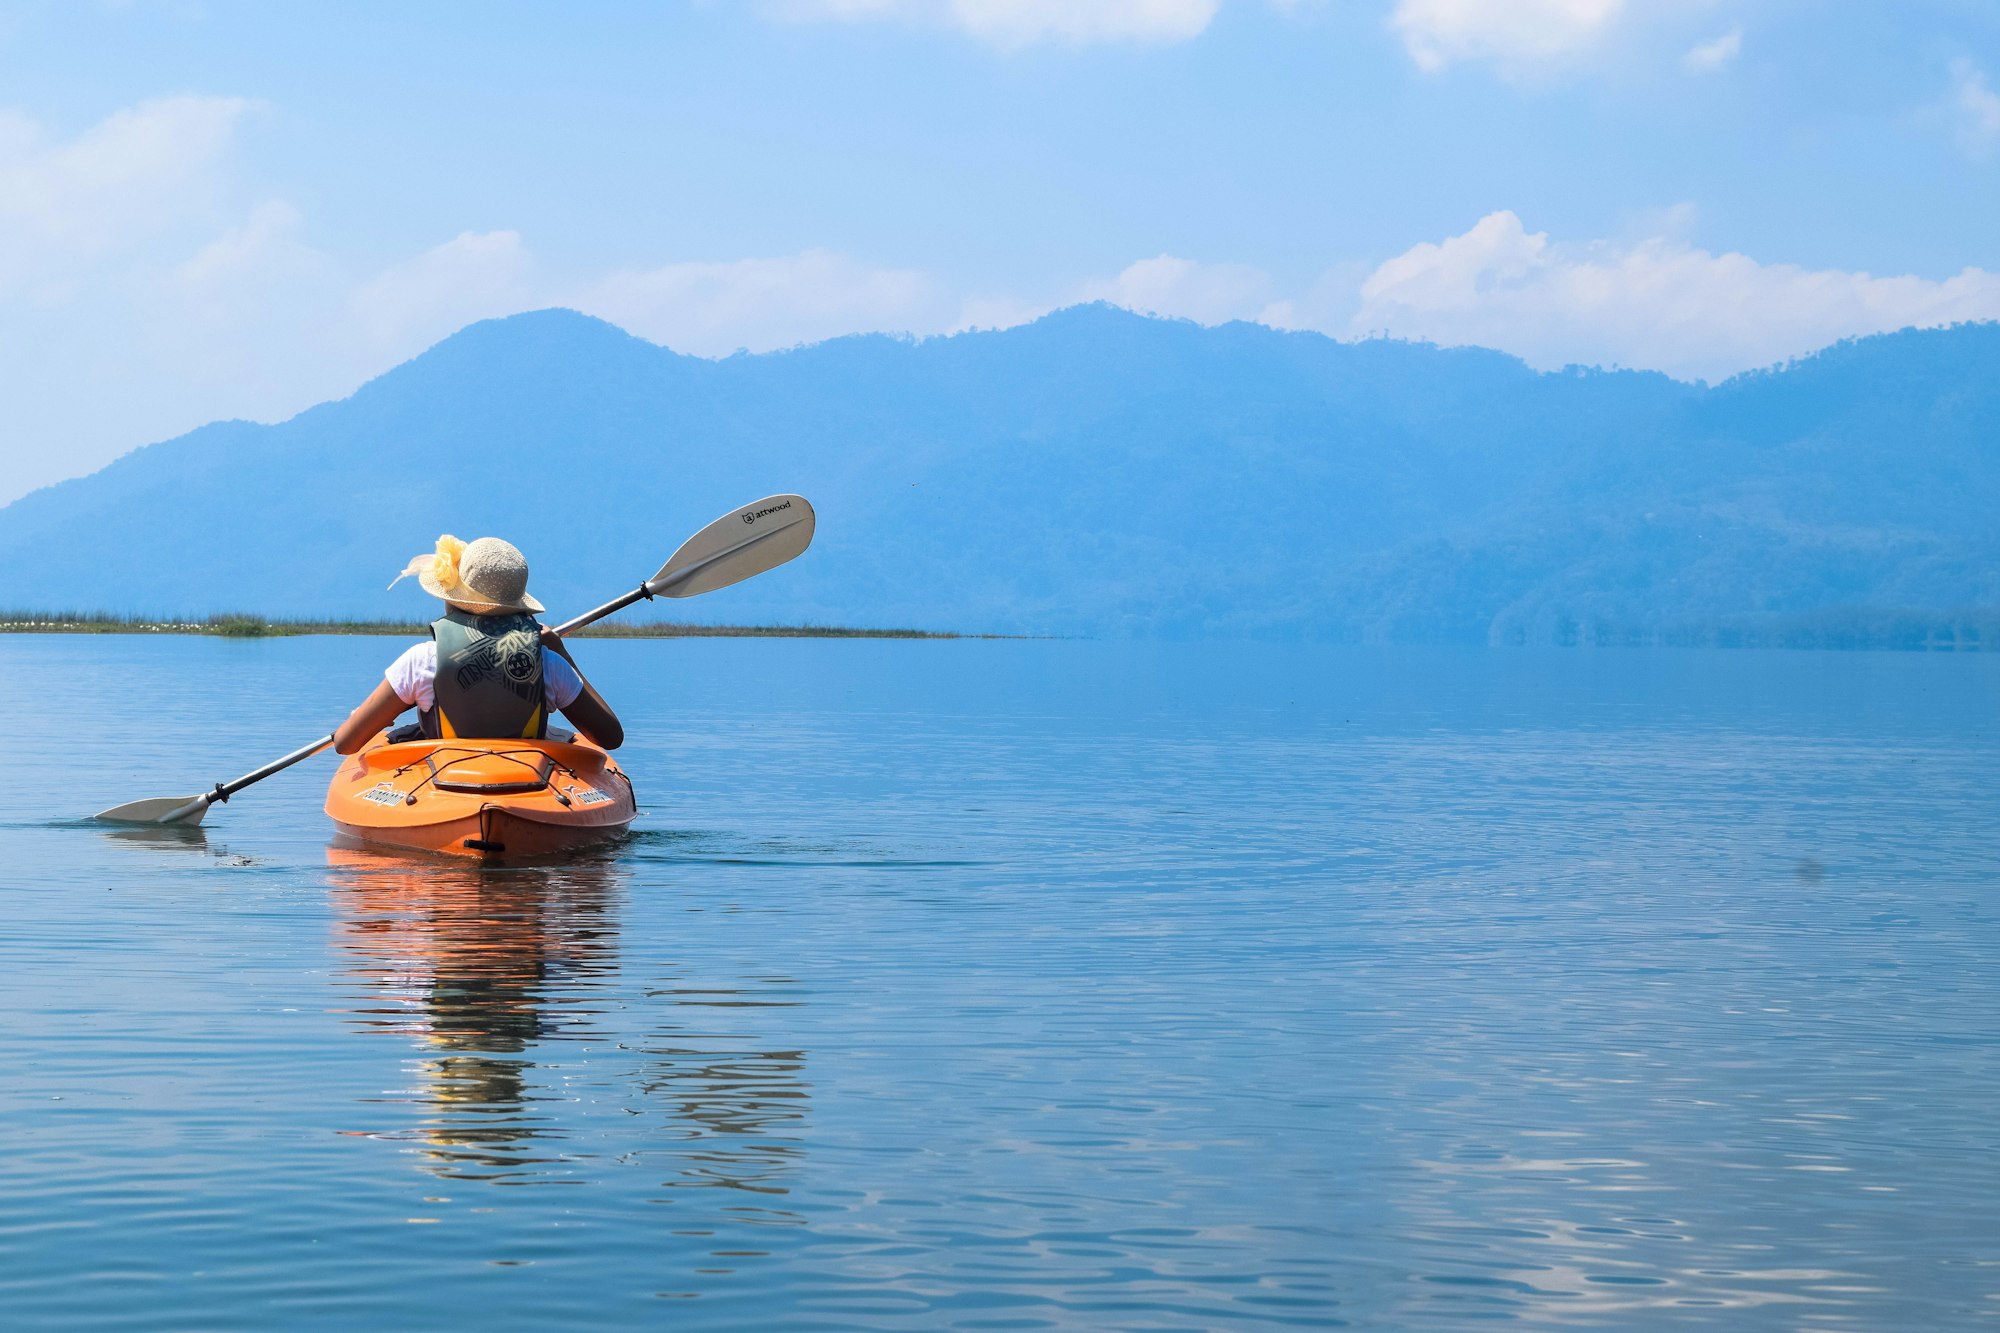 Find the Best Fishing Kayak Australia: Ultimate Guide